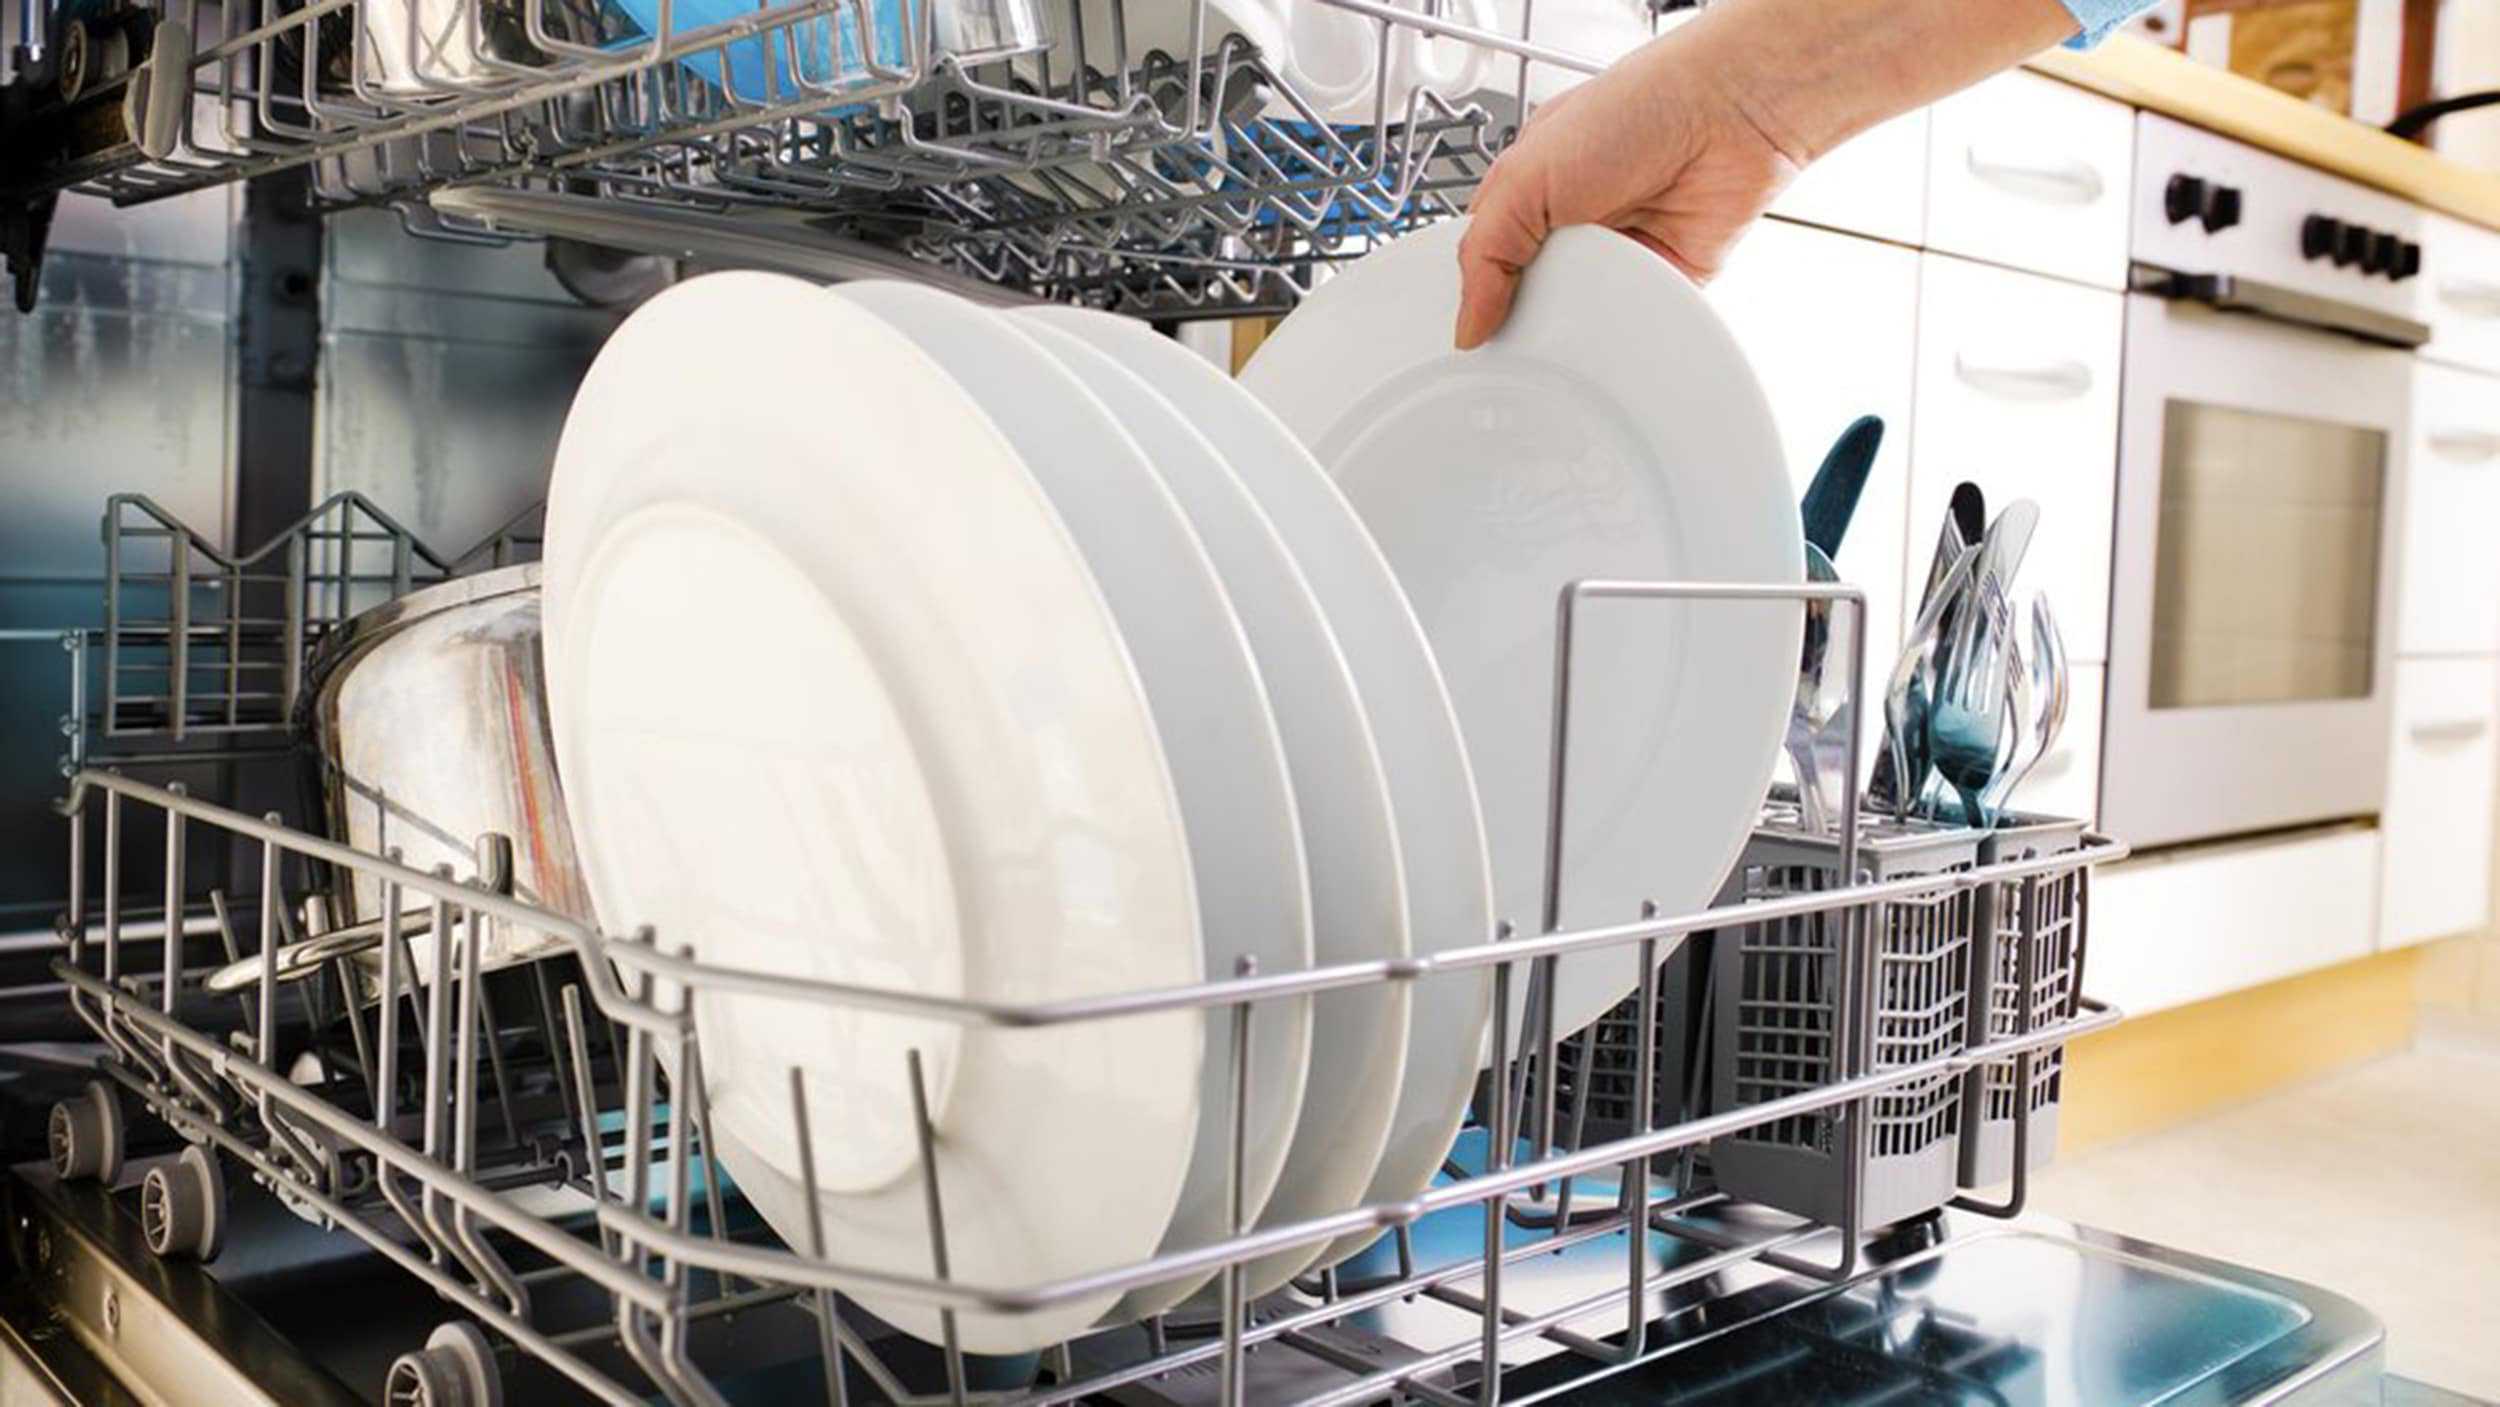 What Can’t Go in Your Dishwasher?